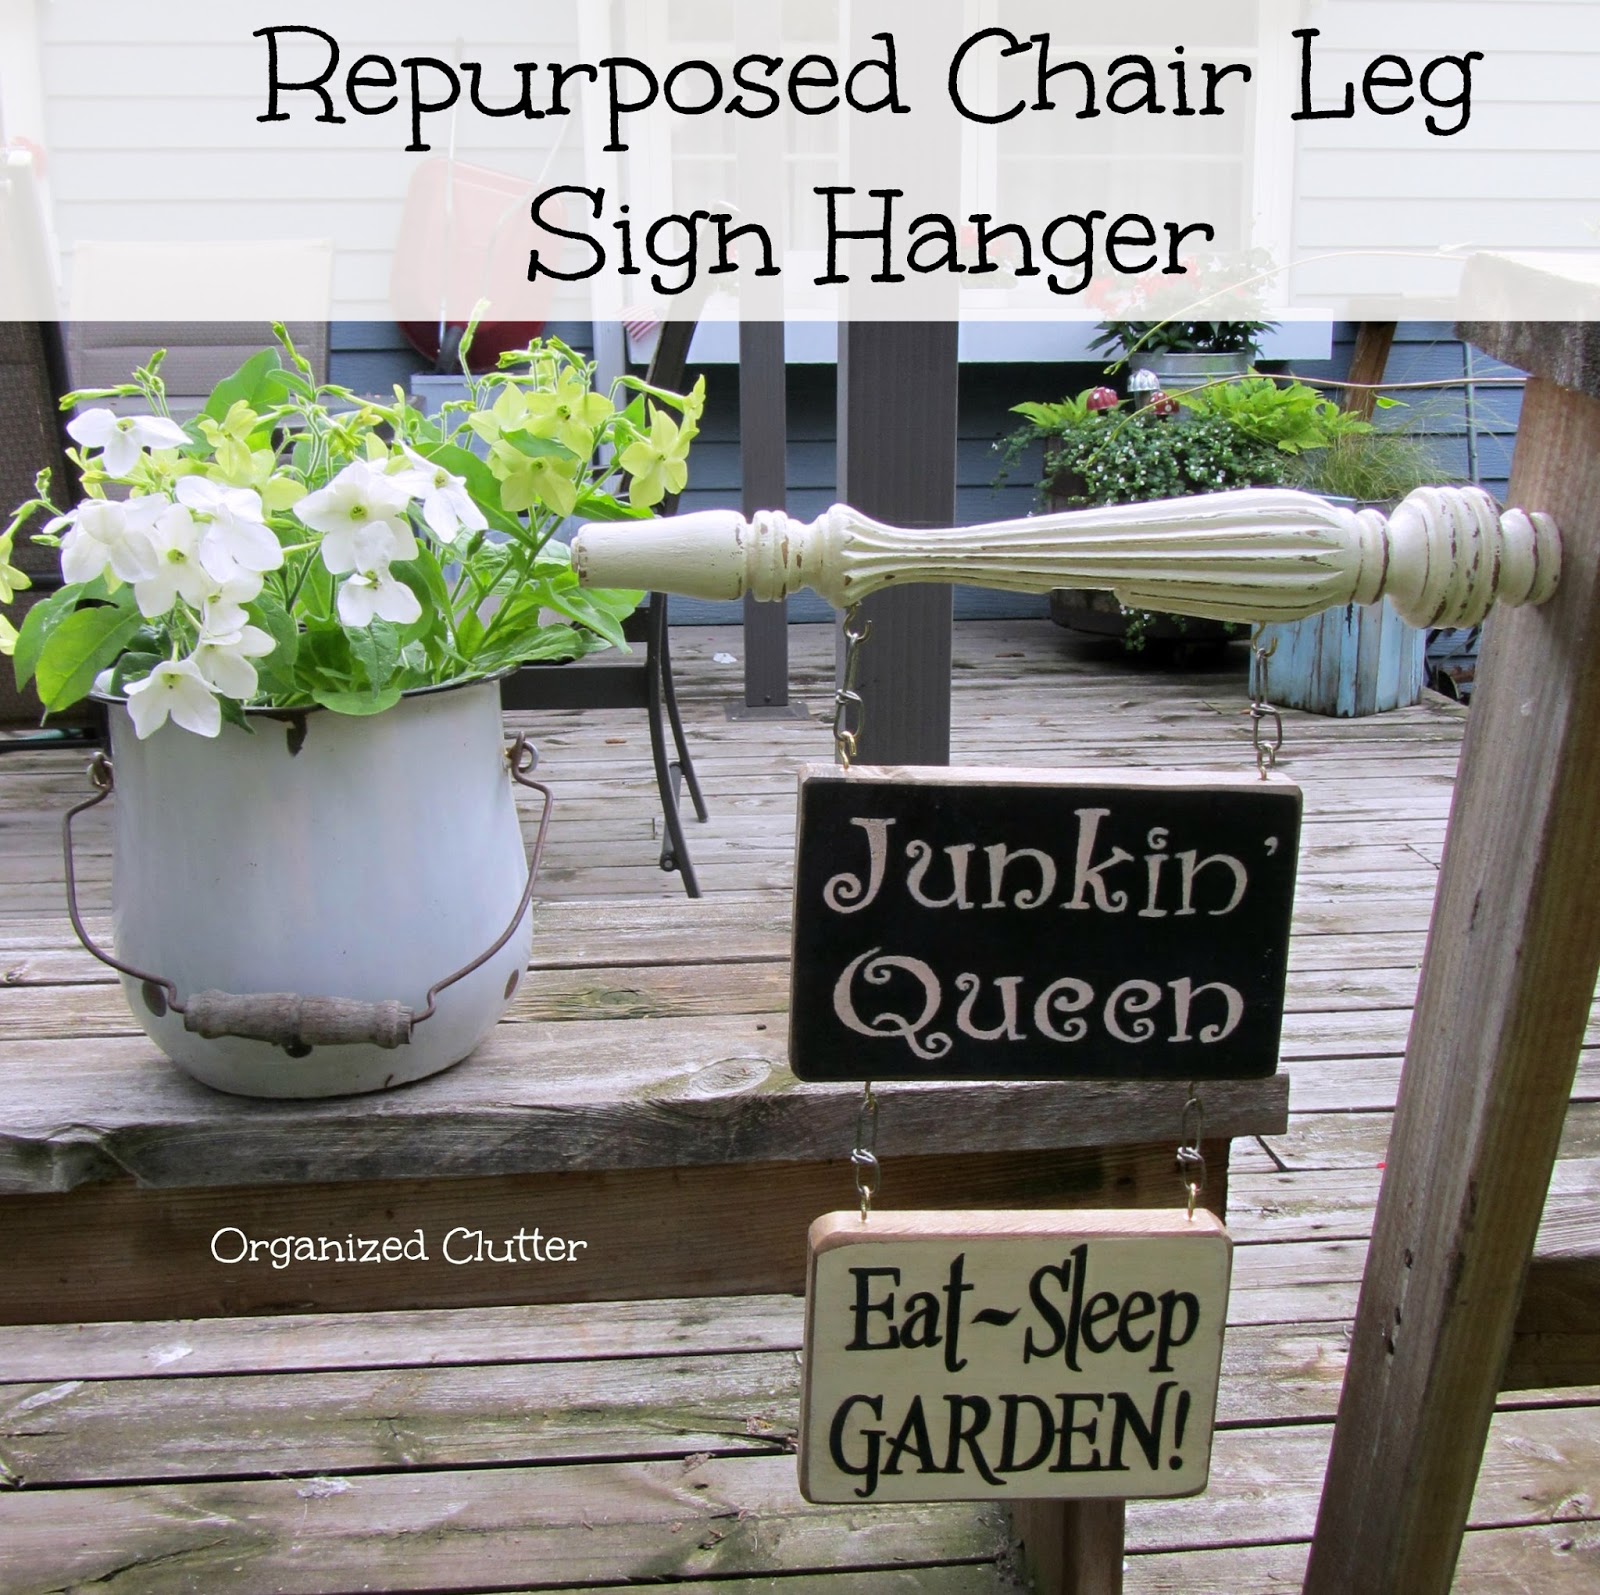 How I Repurposed A Chair Leg To Hang Signs www.organizedclutterqueen.blogspot.com